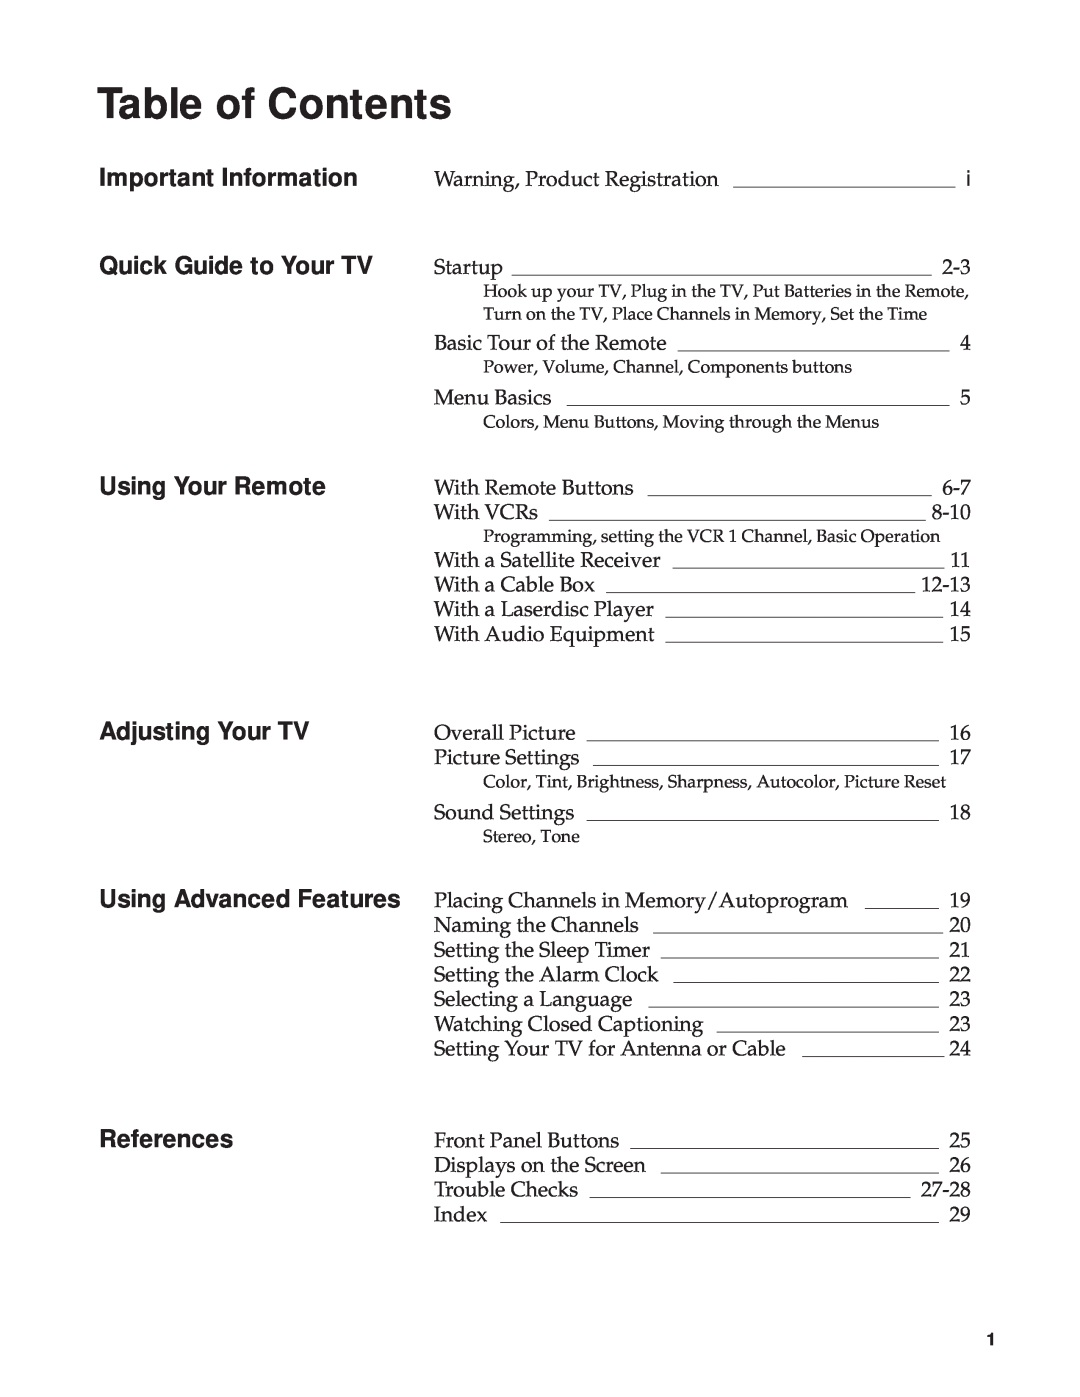 RCA RBA27500, 27000 manual Table of Contents, Important Information Quick Guide to Your TV, References, Overall Picture 